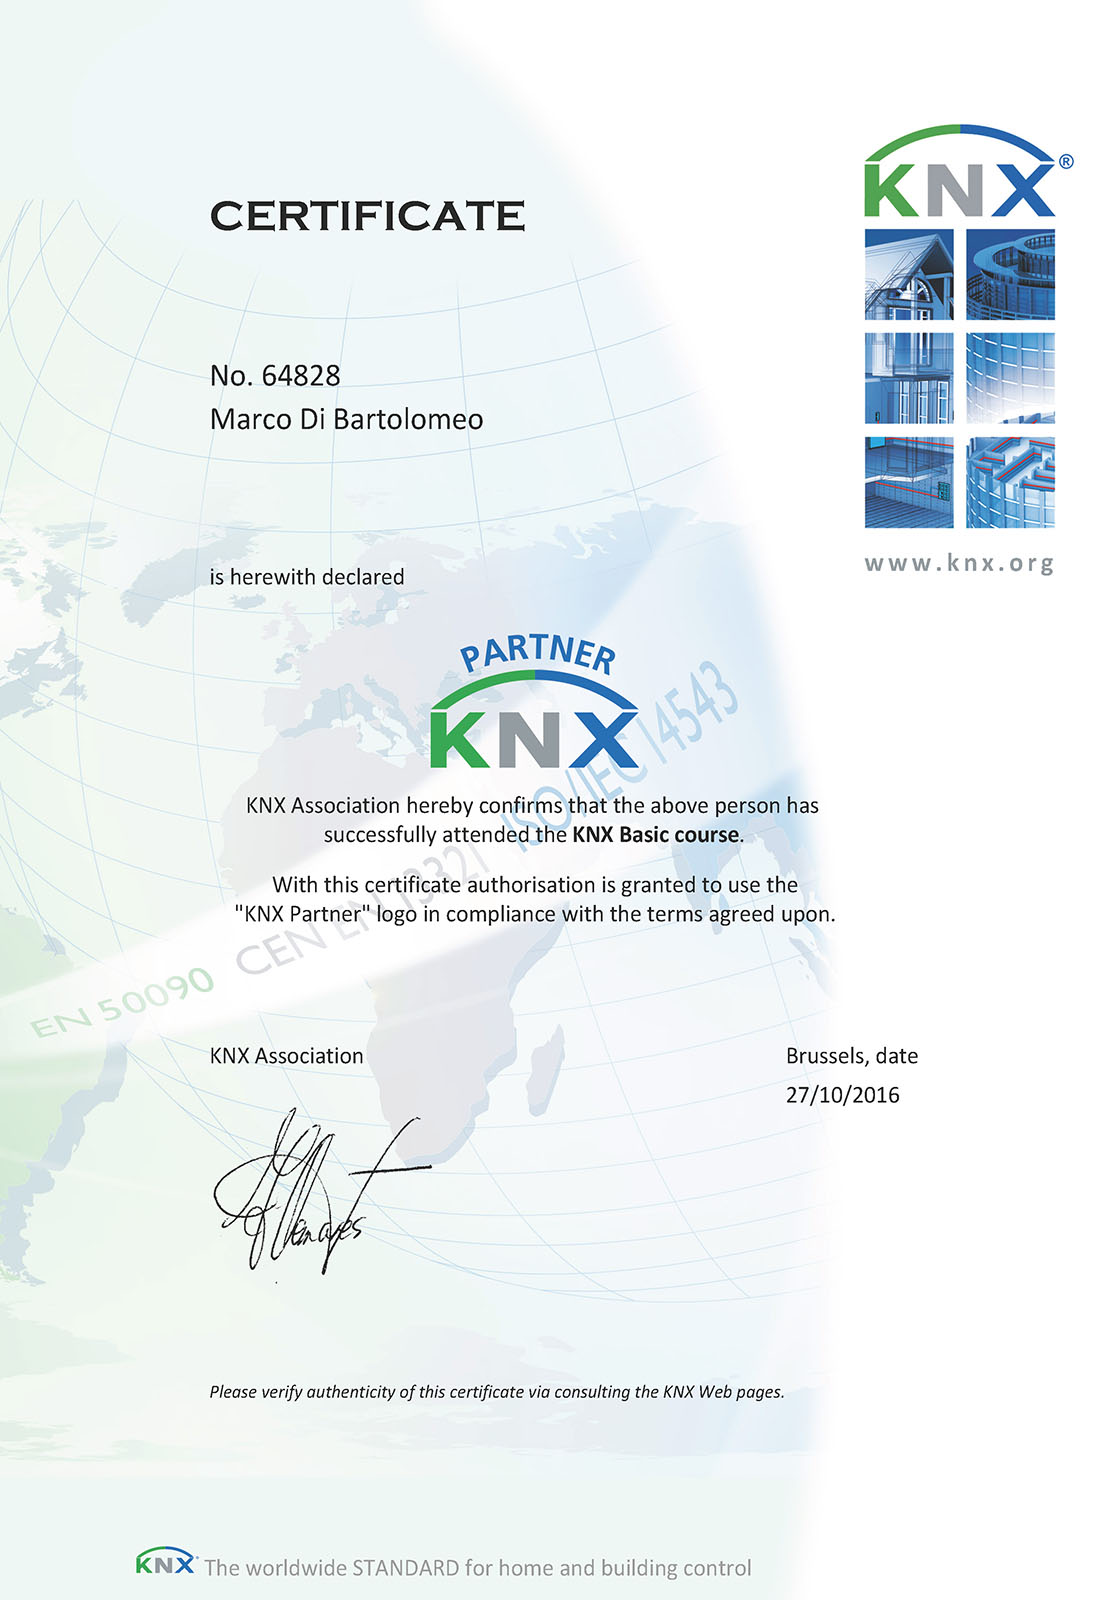 Partner konnex knx domotica - Home and Building Automation - Ing. Marco Di Bartolomeo